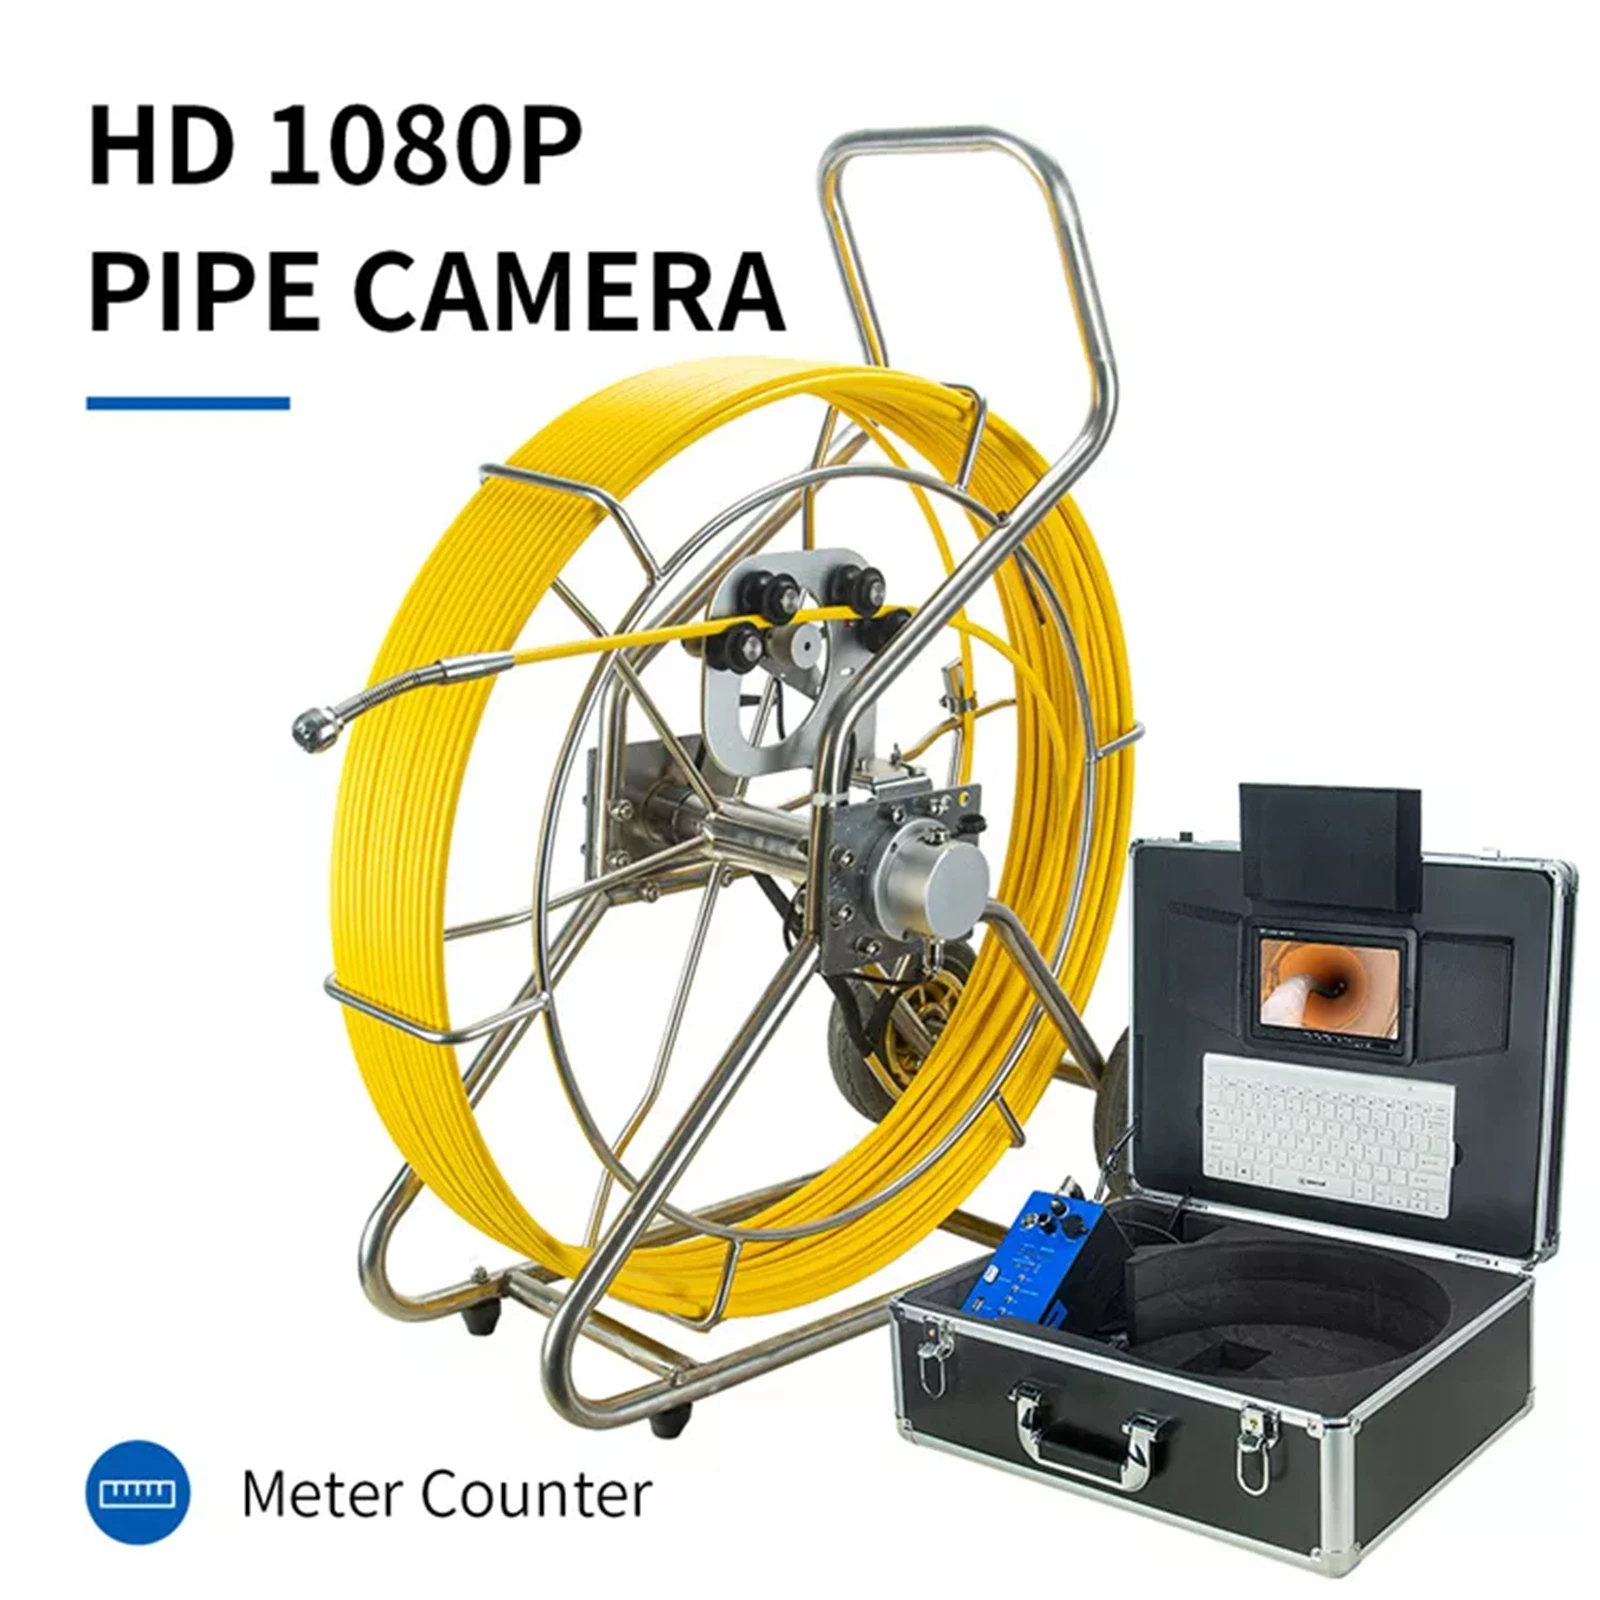 Pipe Inspection Camera, SYANSPAN 9 inch Sewer Endoscope Camer Meter Counter Vedio and Redio and 32X image enlarge and 9mm cable